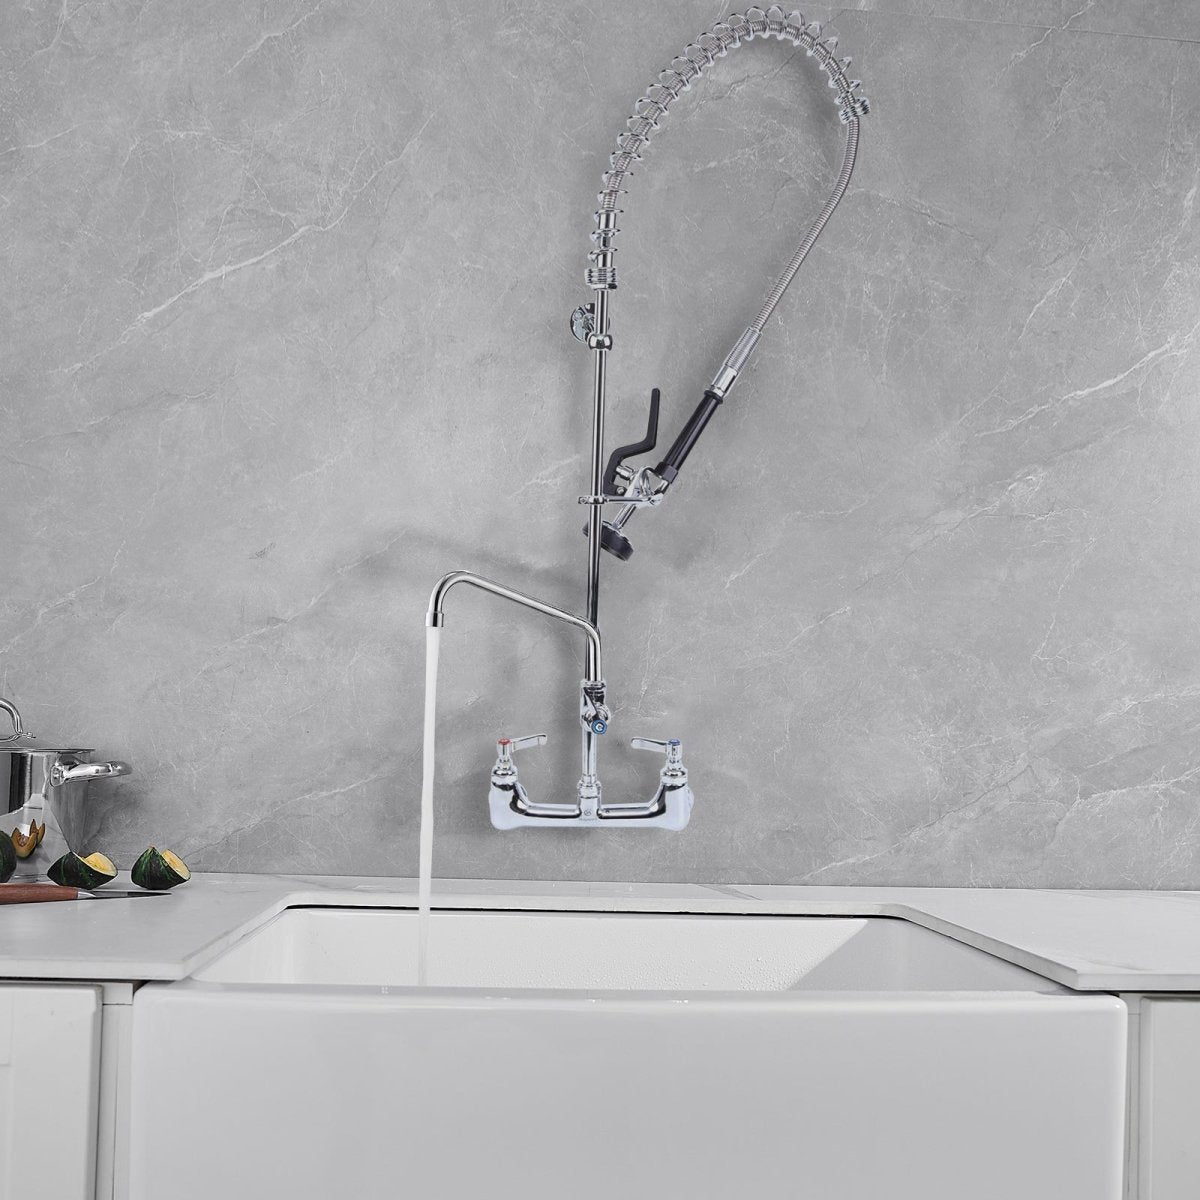 2-Handle Wall Mount Pre-Rinse Spray Kitchen Faucet Chrome - buyfaucet.com